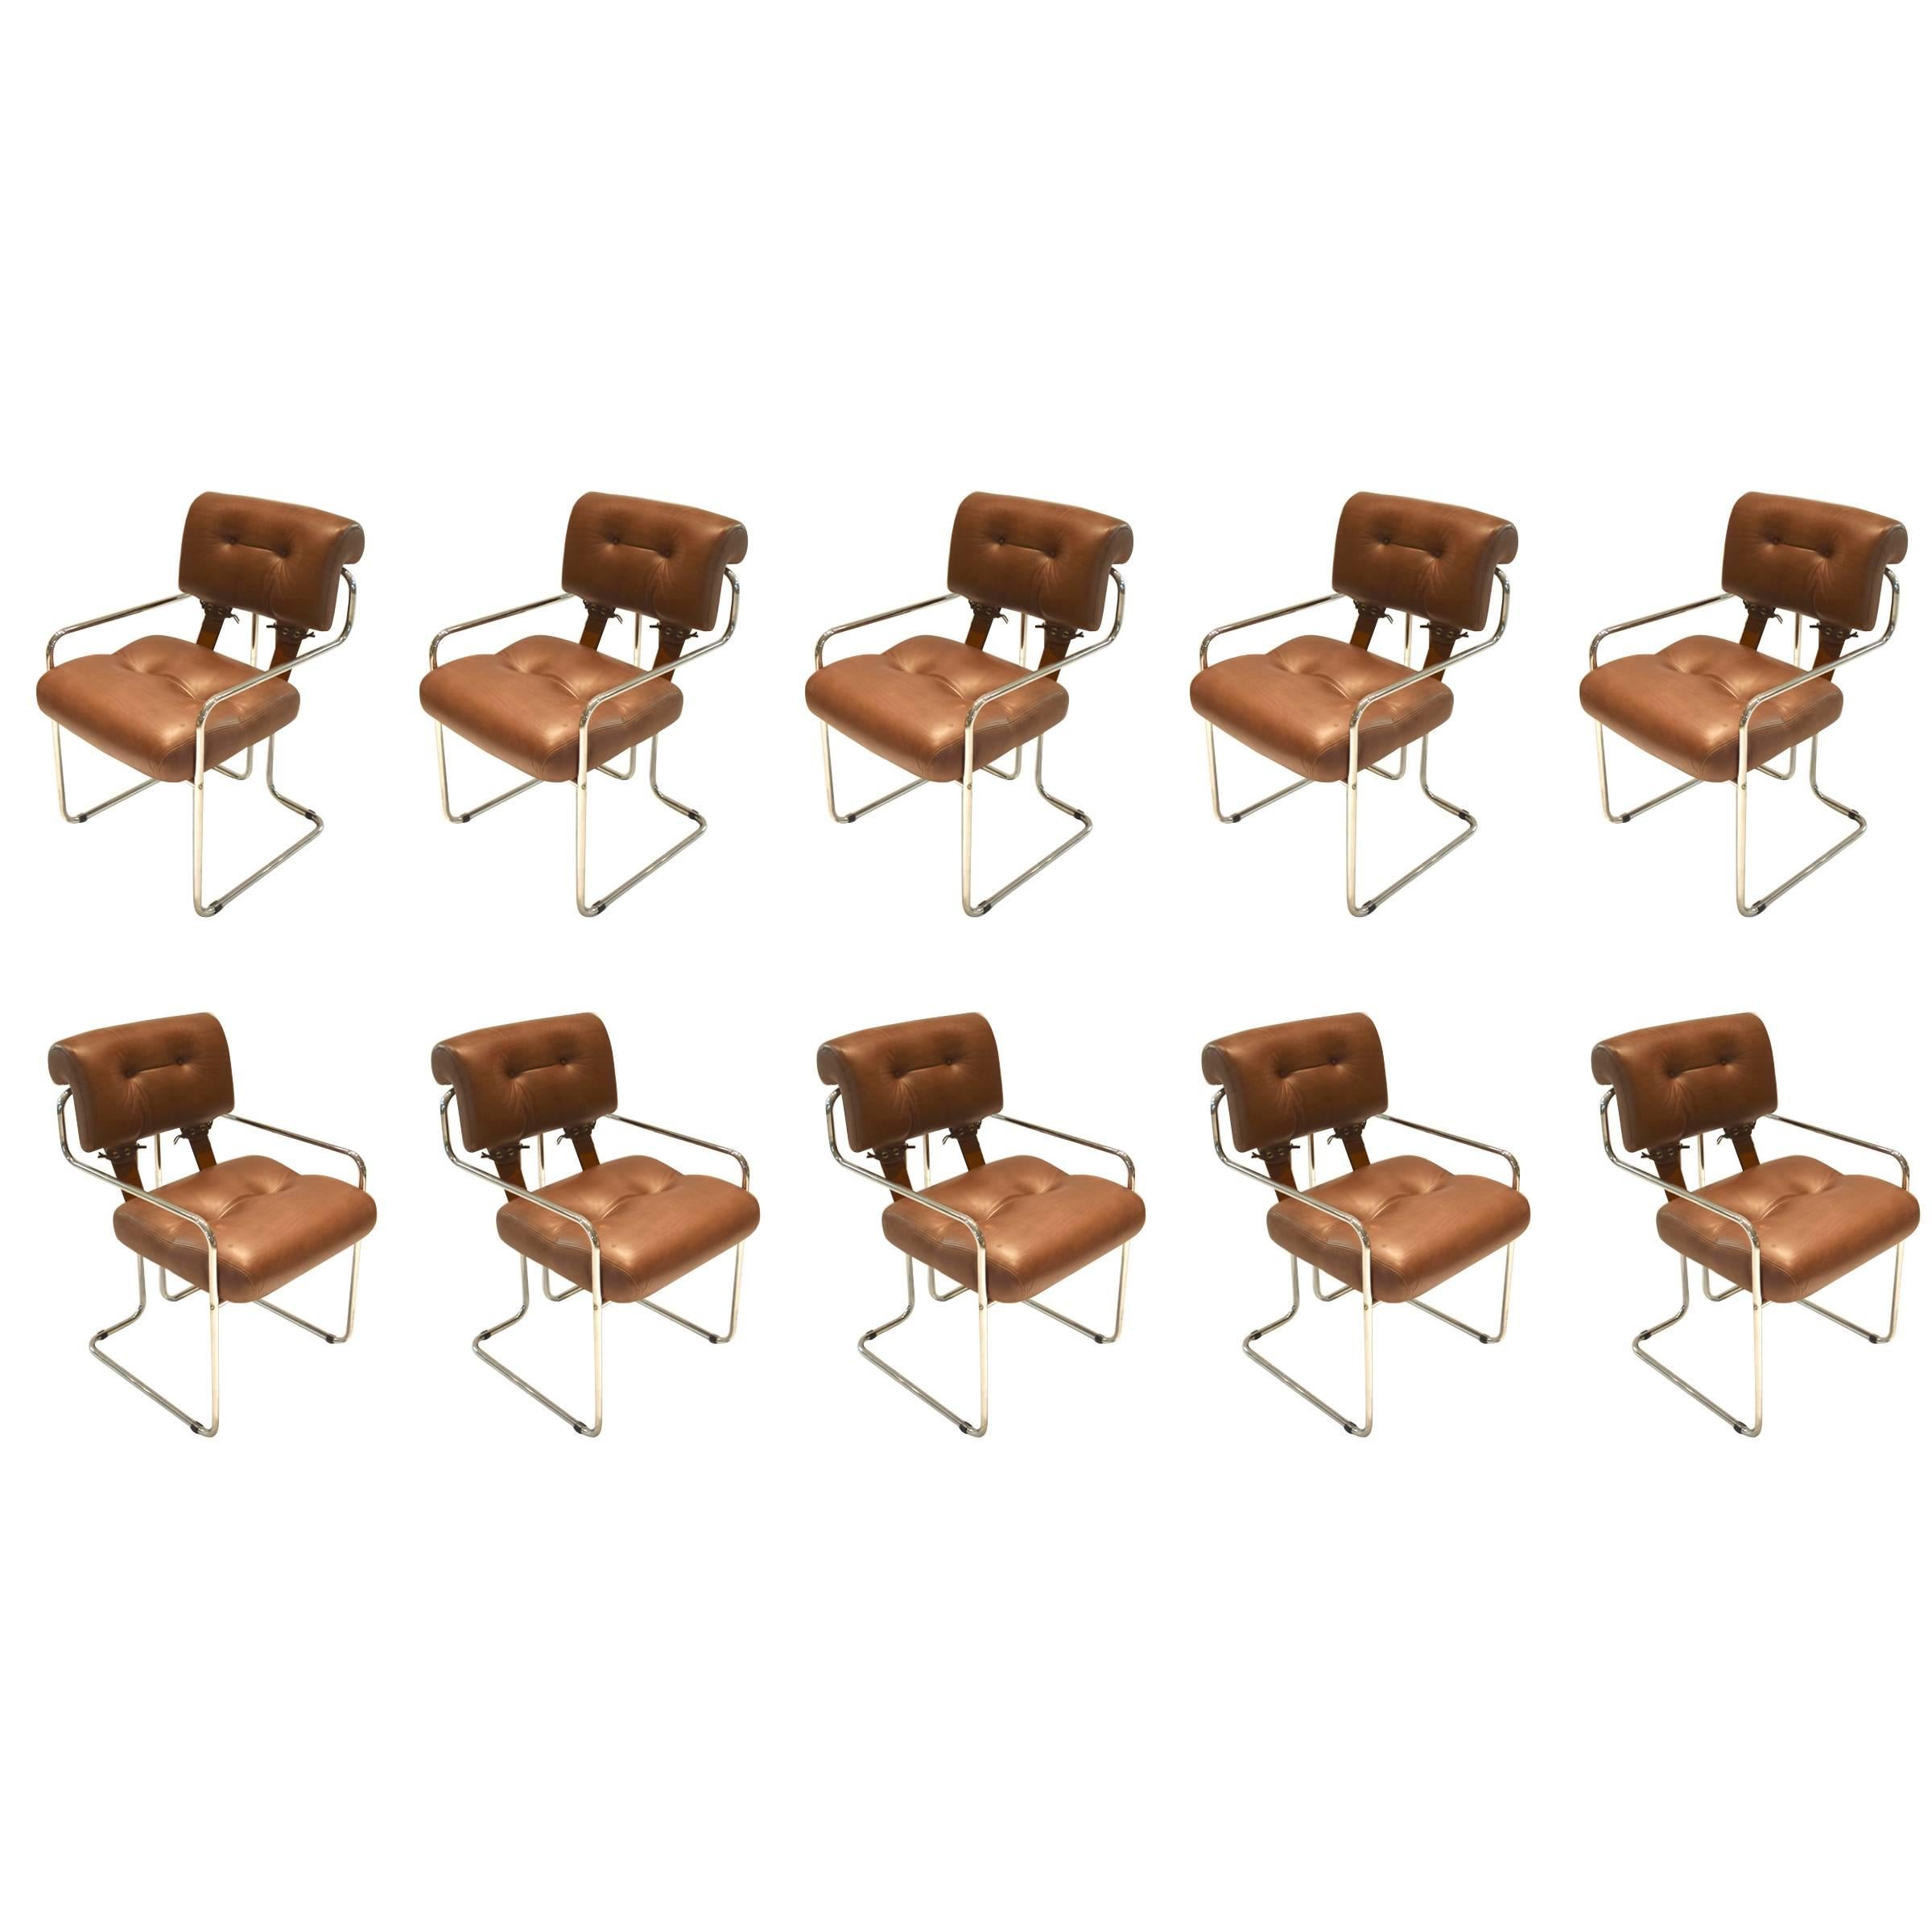 Ten Reupholstered Tucroma Chairs, Guido Faleschini for I4Mariani, Italy